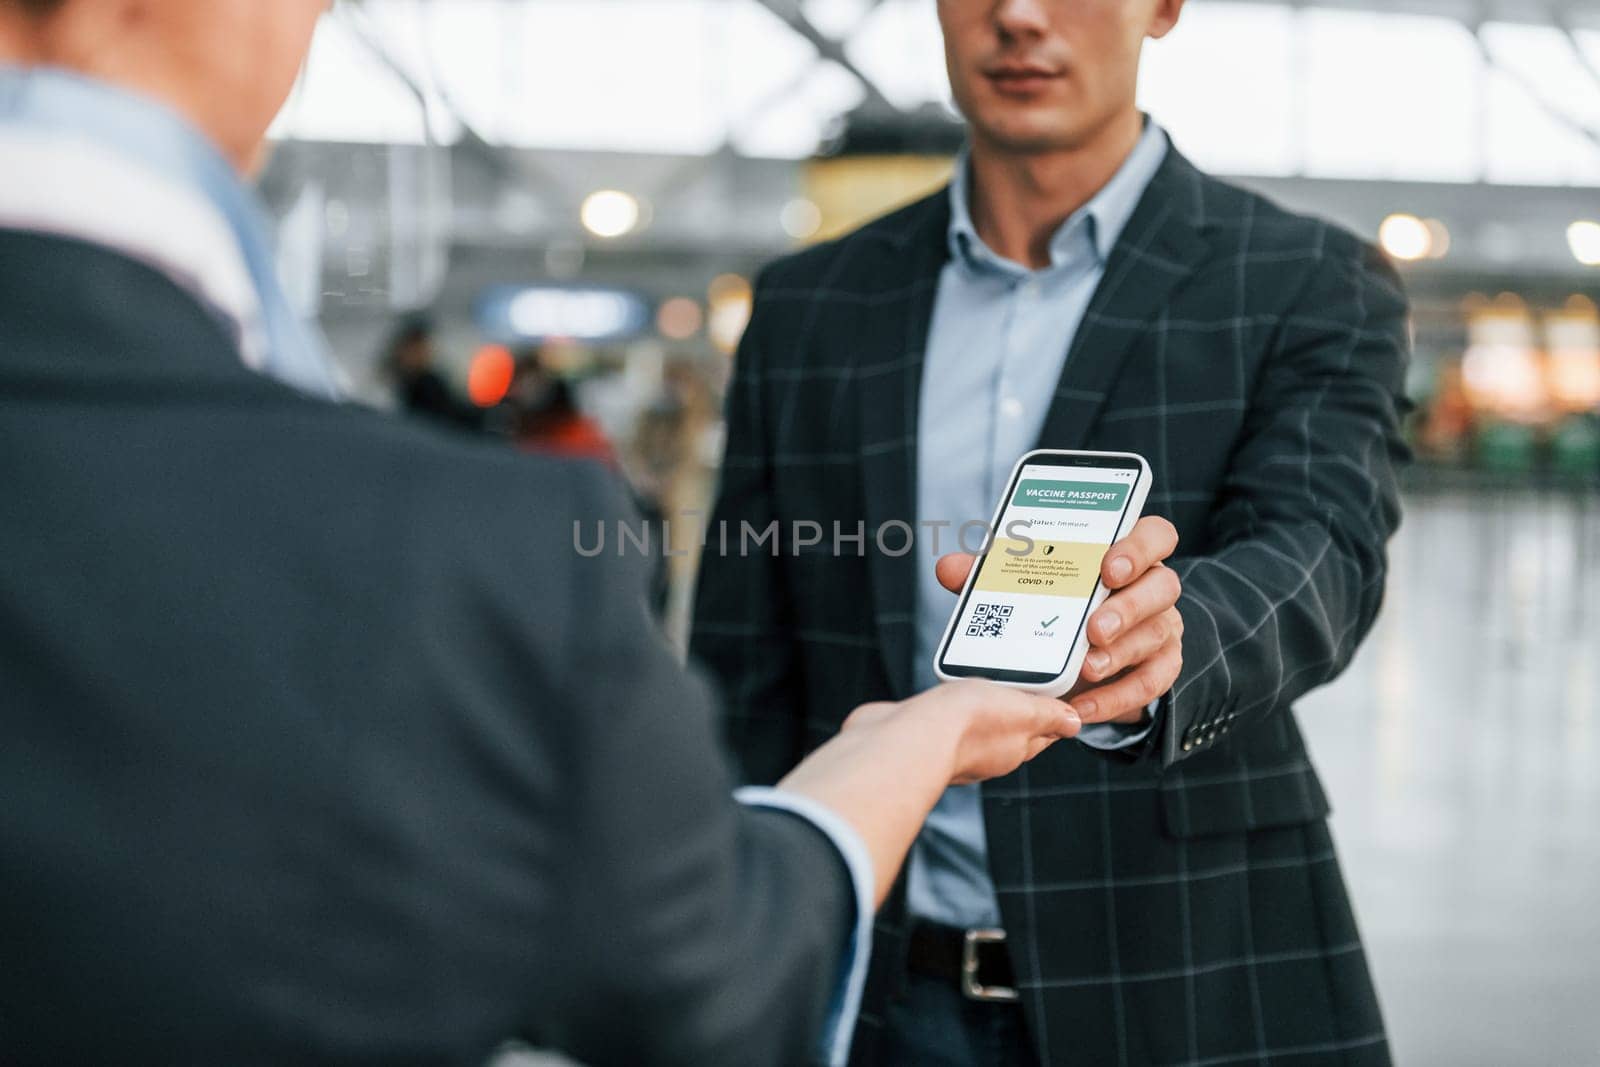 Holding and showing vaccination certificate. Young businessman in formal clothes is in the airport at daytime by Standret